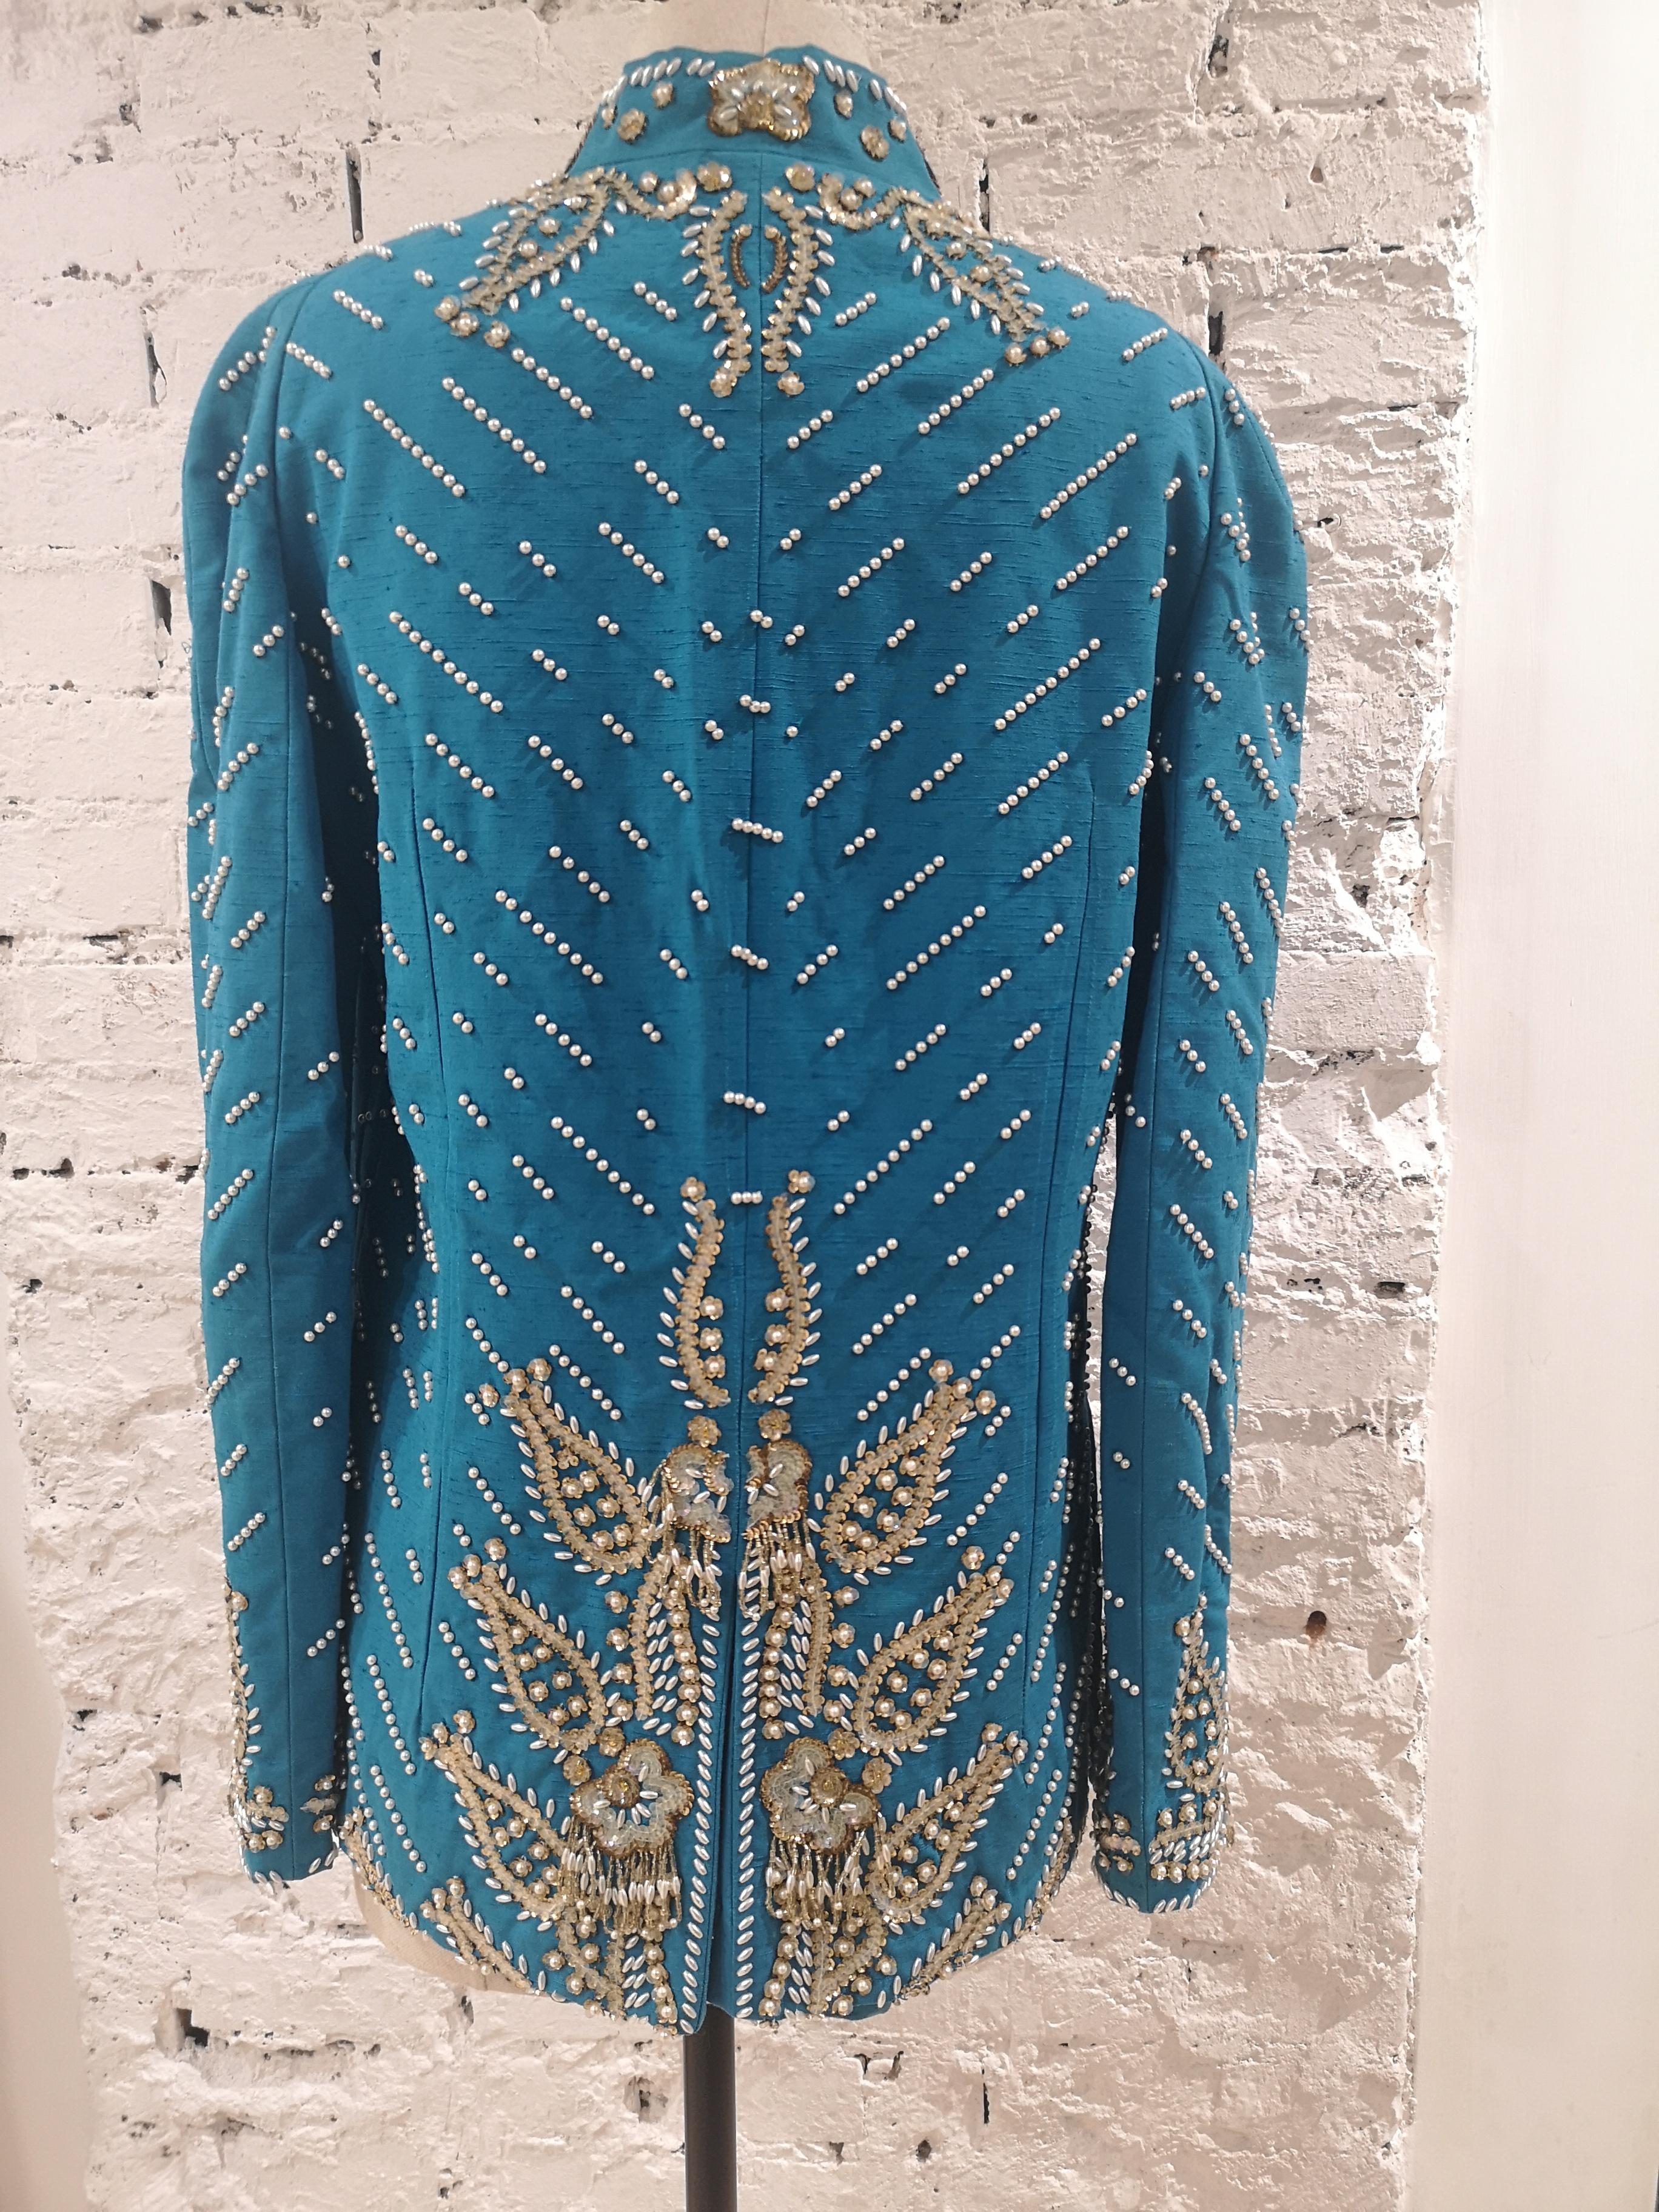 Christian Dior turquoise pearls beads sequins jacket 7